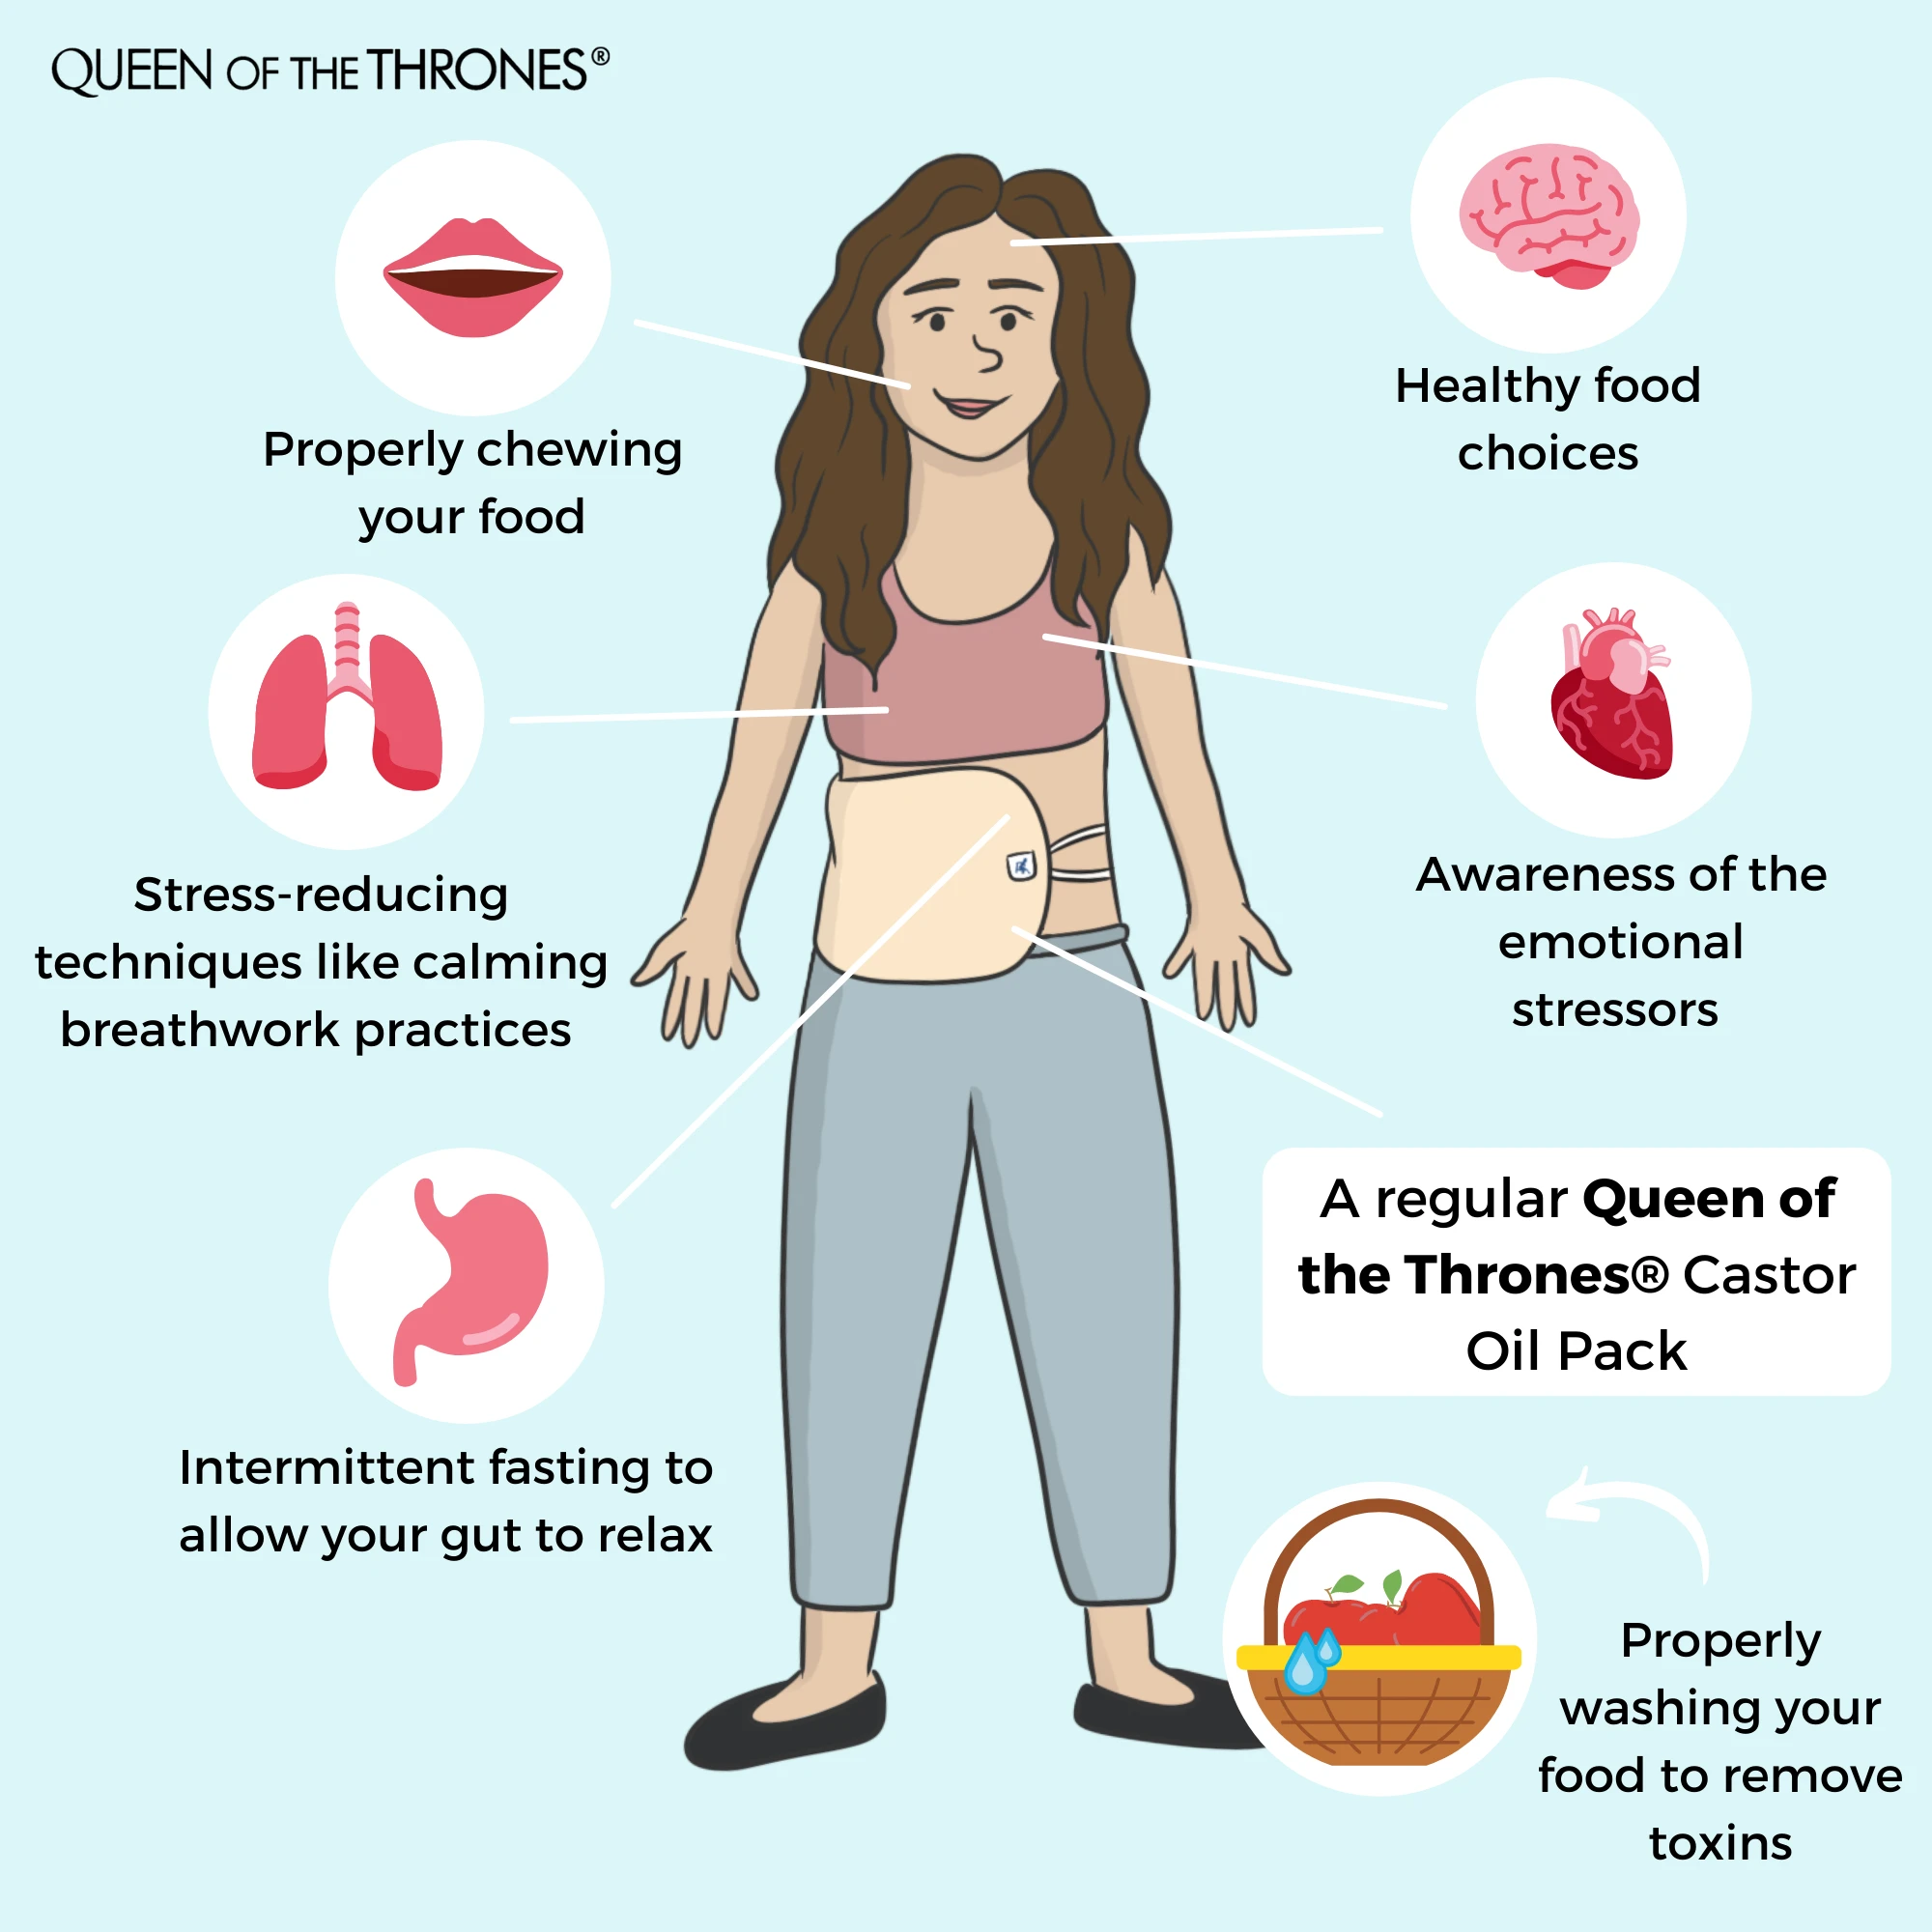 Best ways to avoid Leaky & Inflammed Gut according to Queen of the Thrones